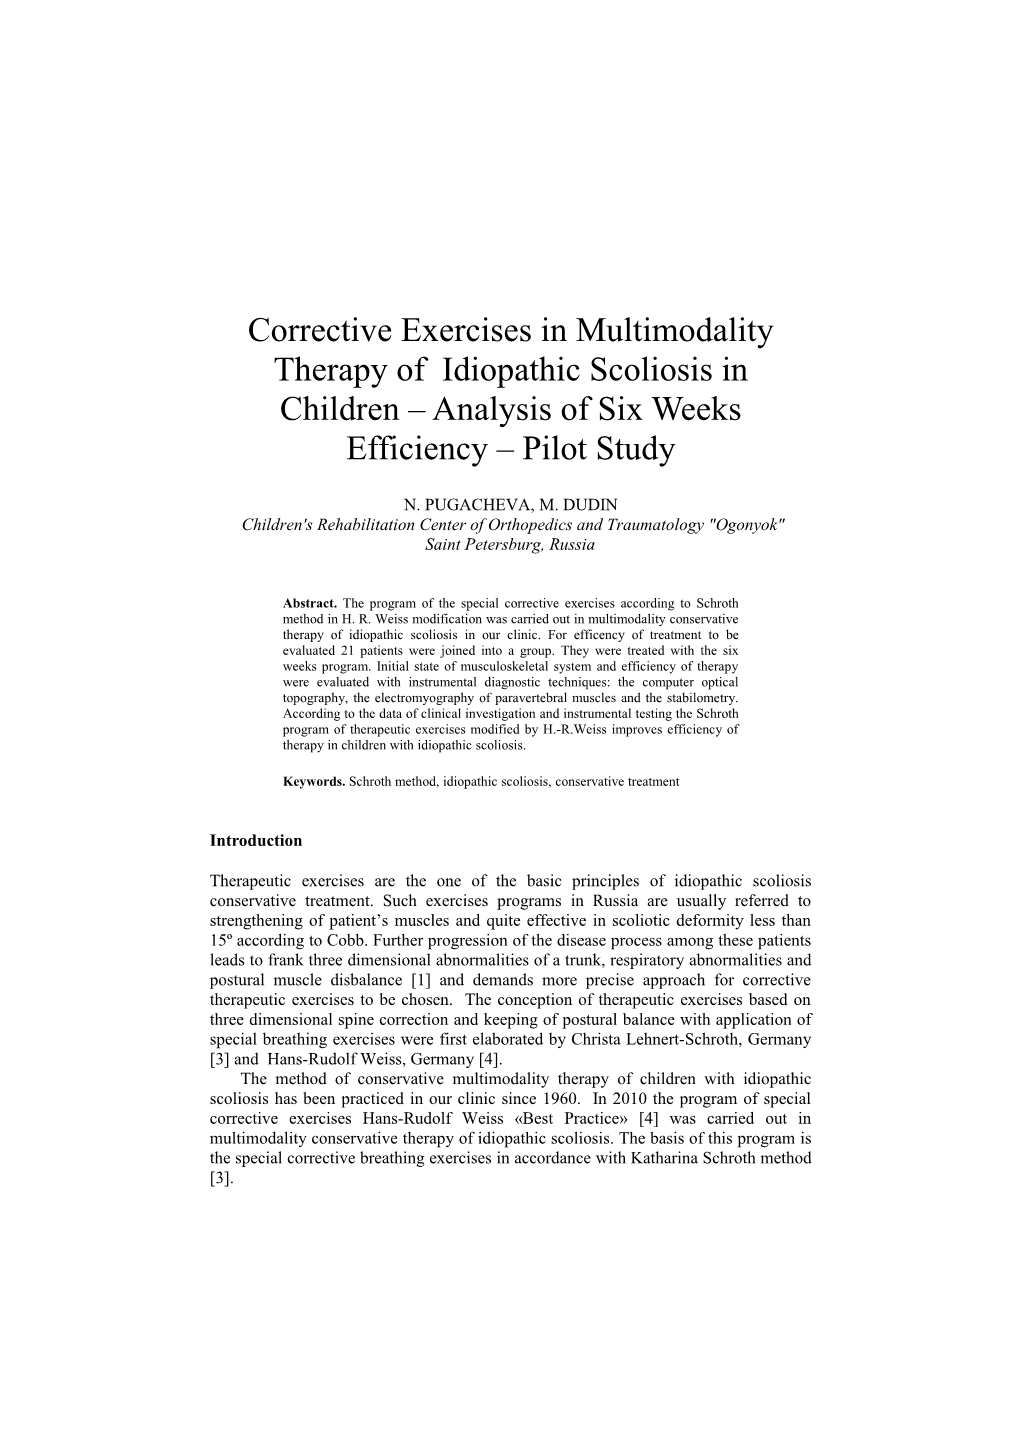 Corrective Exercises in Multimodality Therapy of Idiopathic Scoliosis in Children Analysis